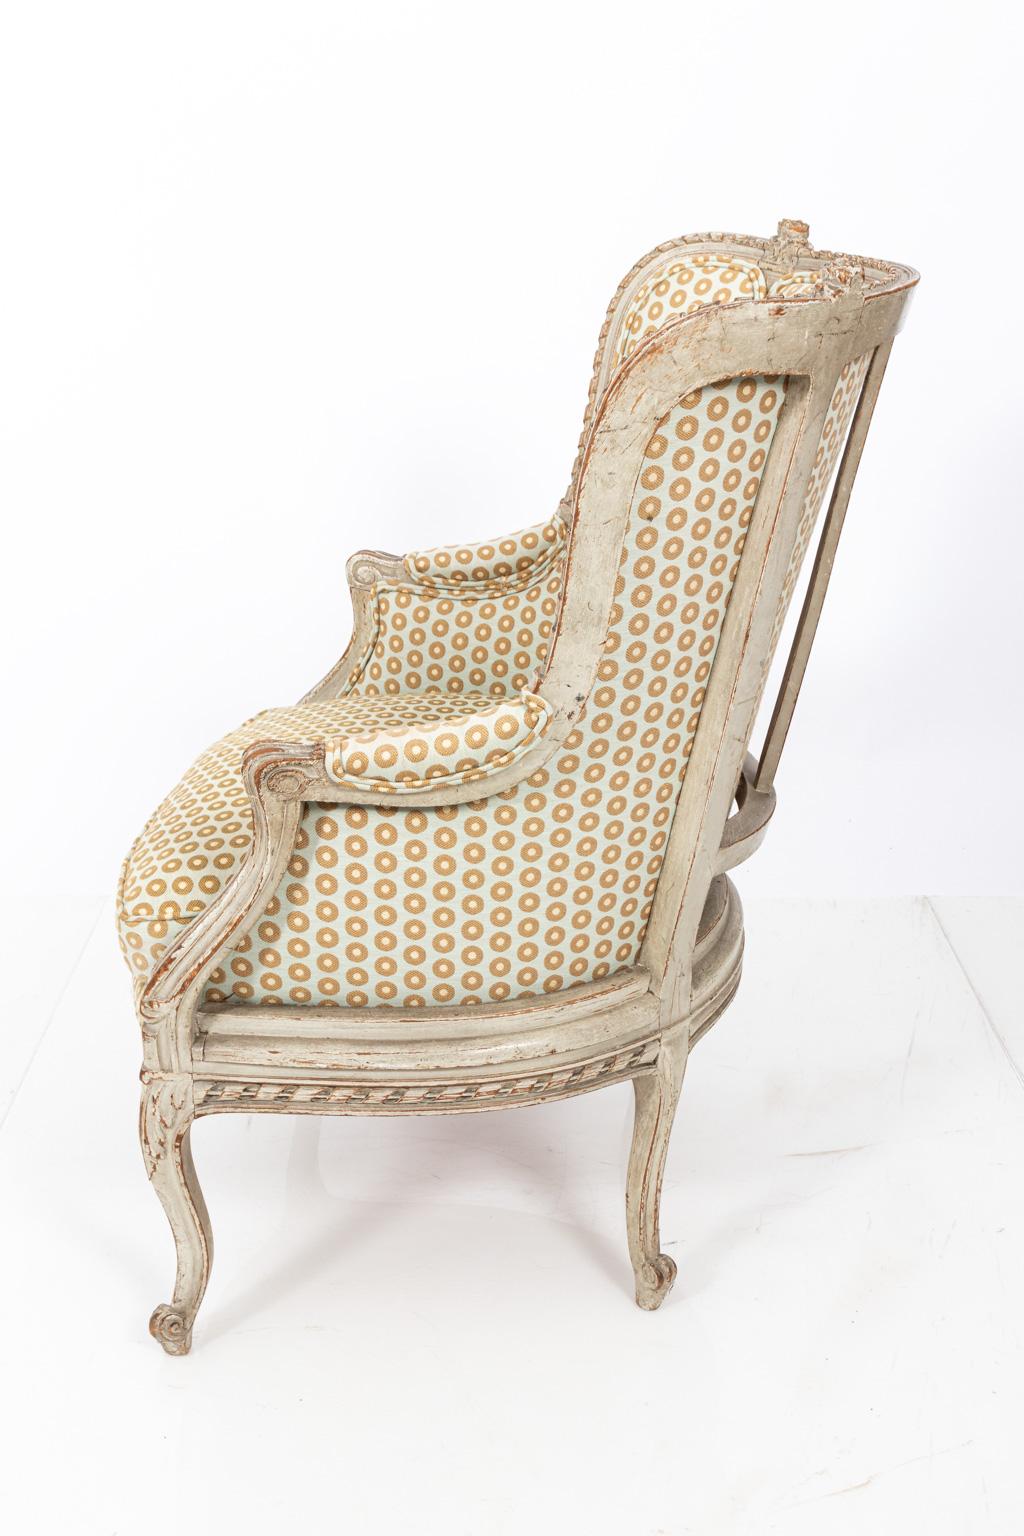 Swedish Gustavian style bergère armchair with distressed finish and tub back surrounded by carved flowers. Please note of wear consistent with age, circa 19th century.